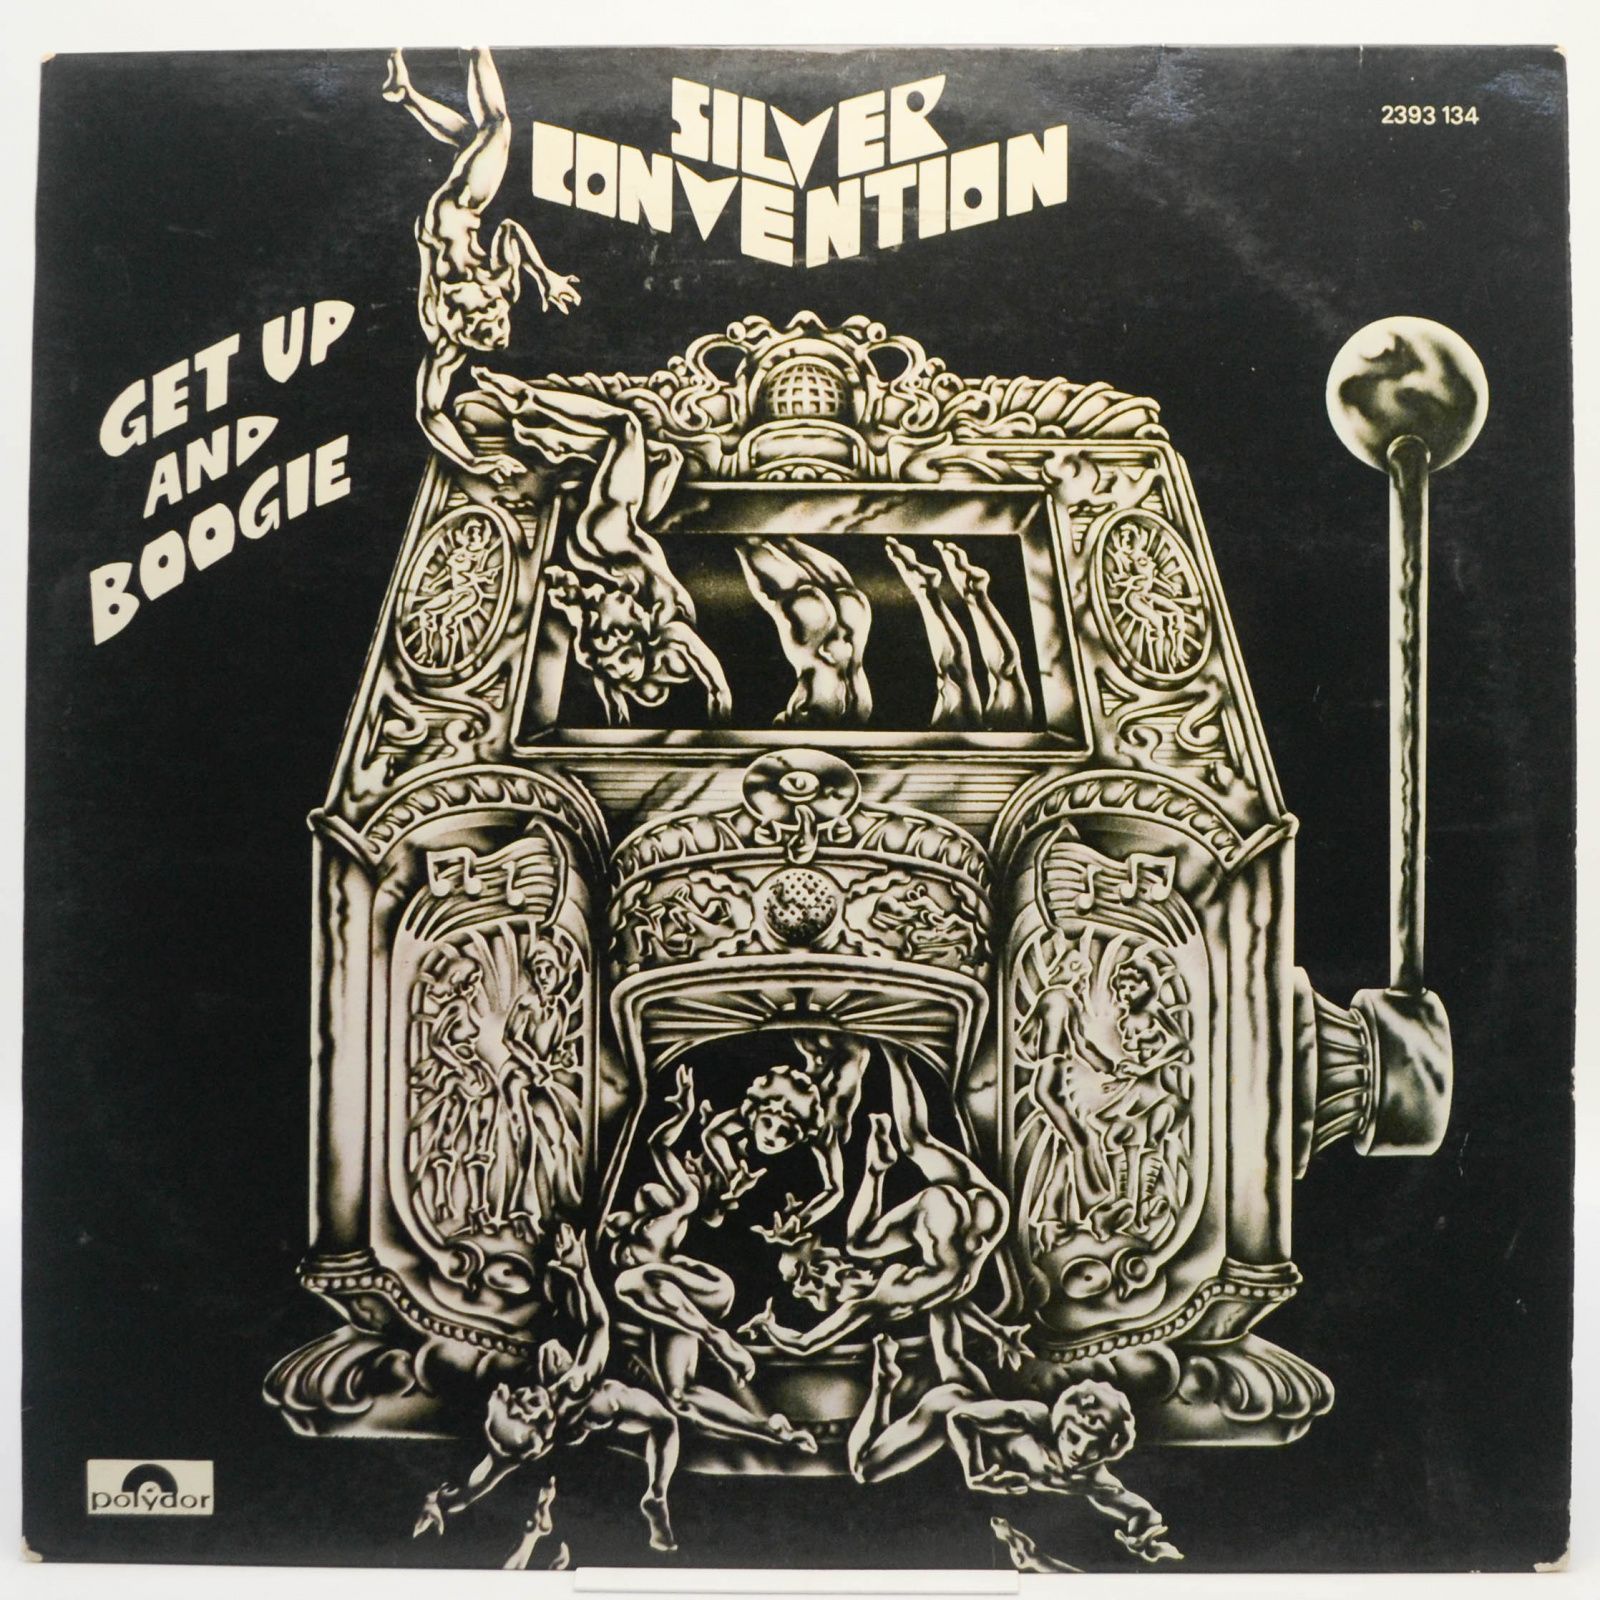 Silver Convention — Get Up And Boogie!, 1976